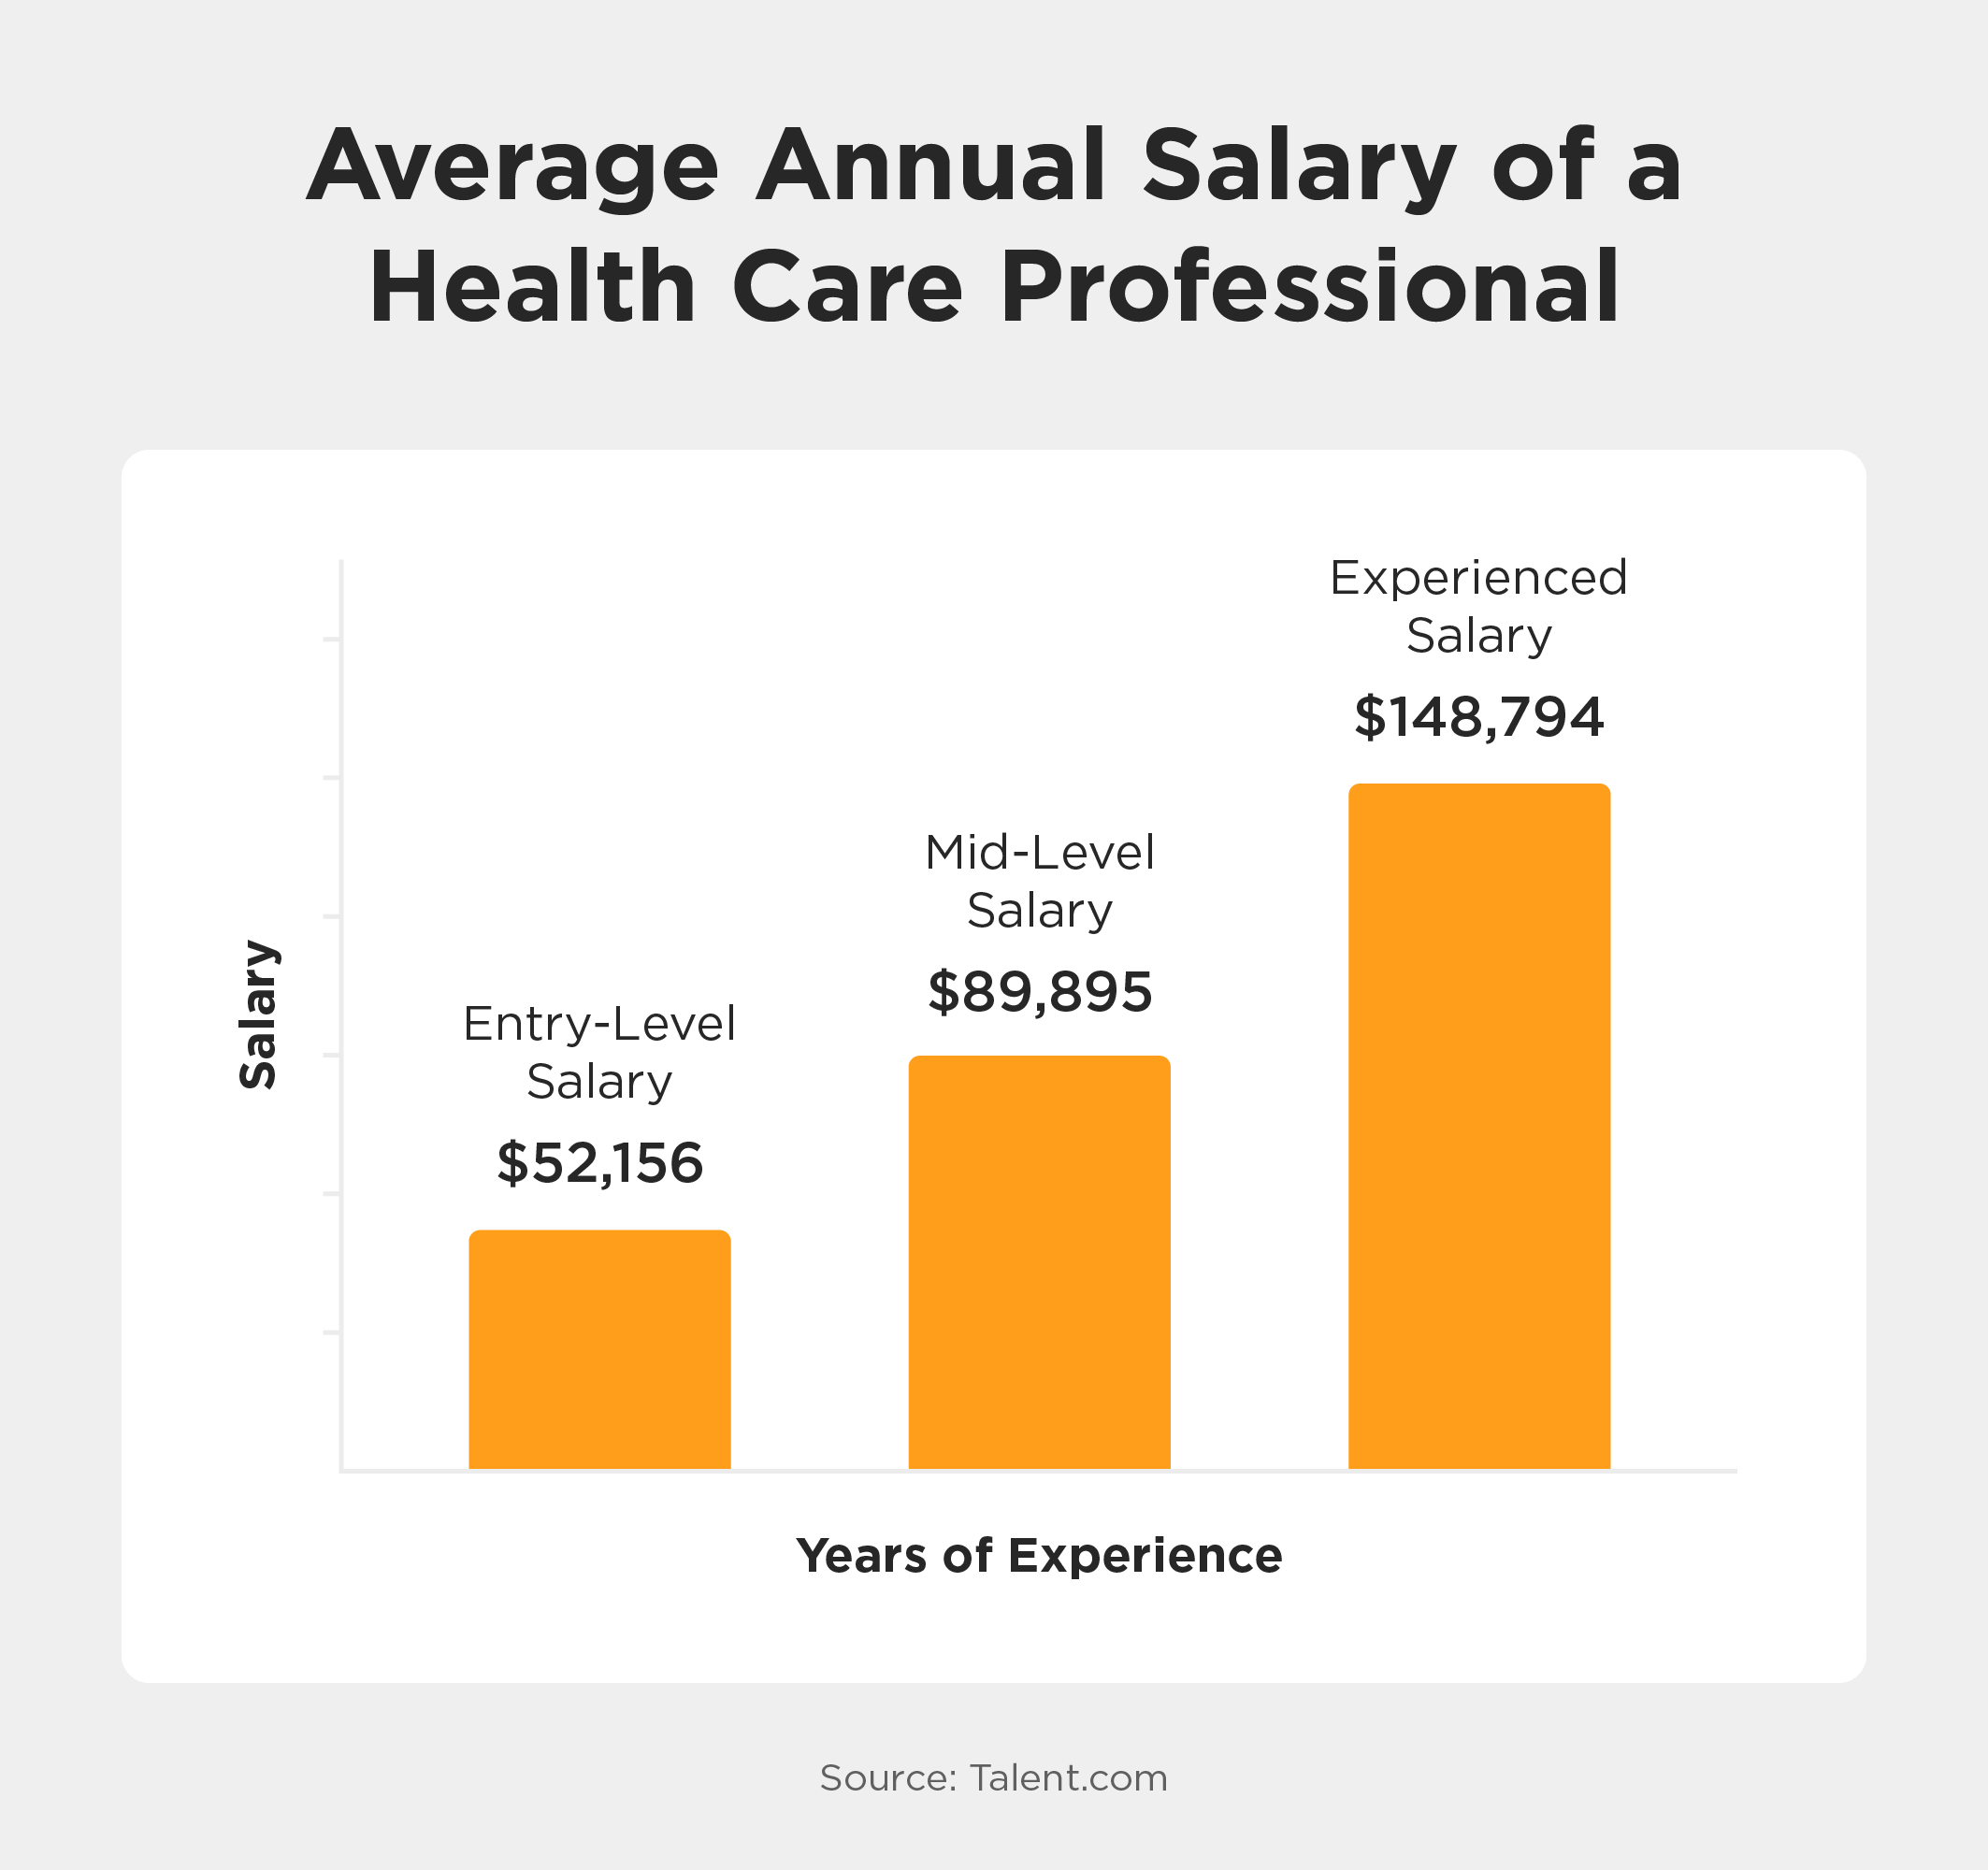 Graph showing the range of salaries for health care professionals.